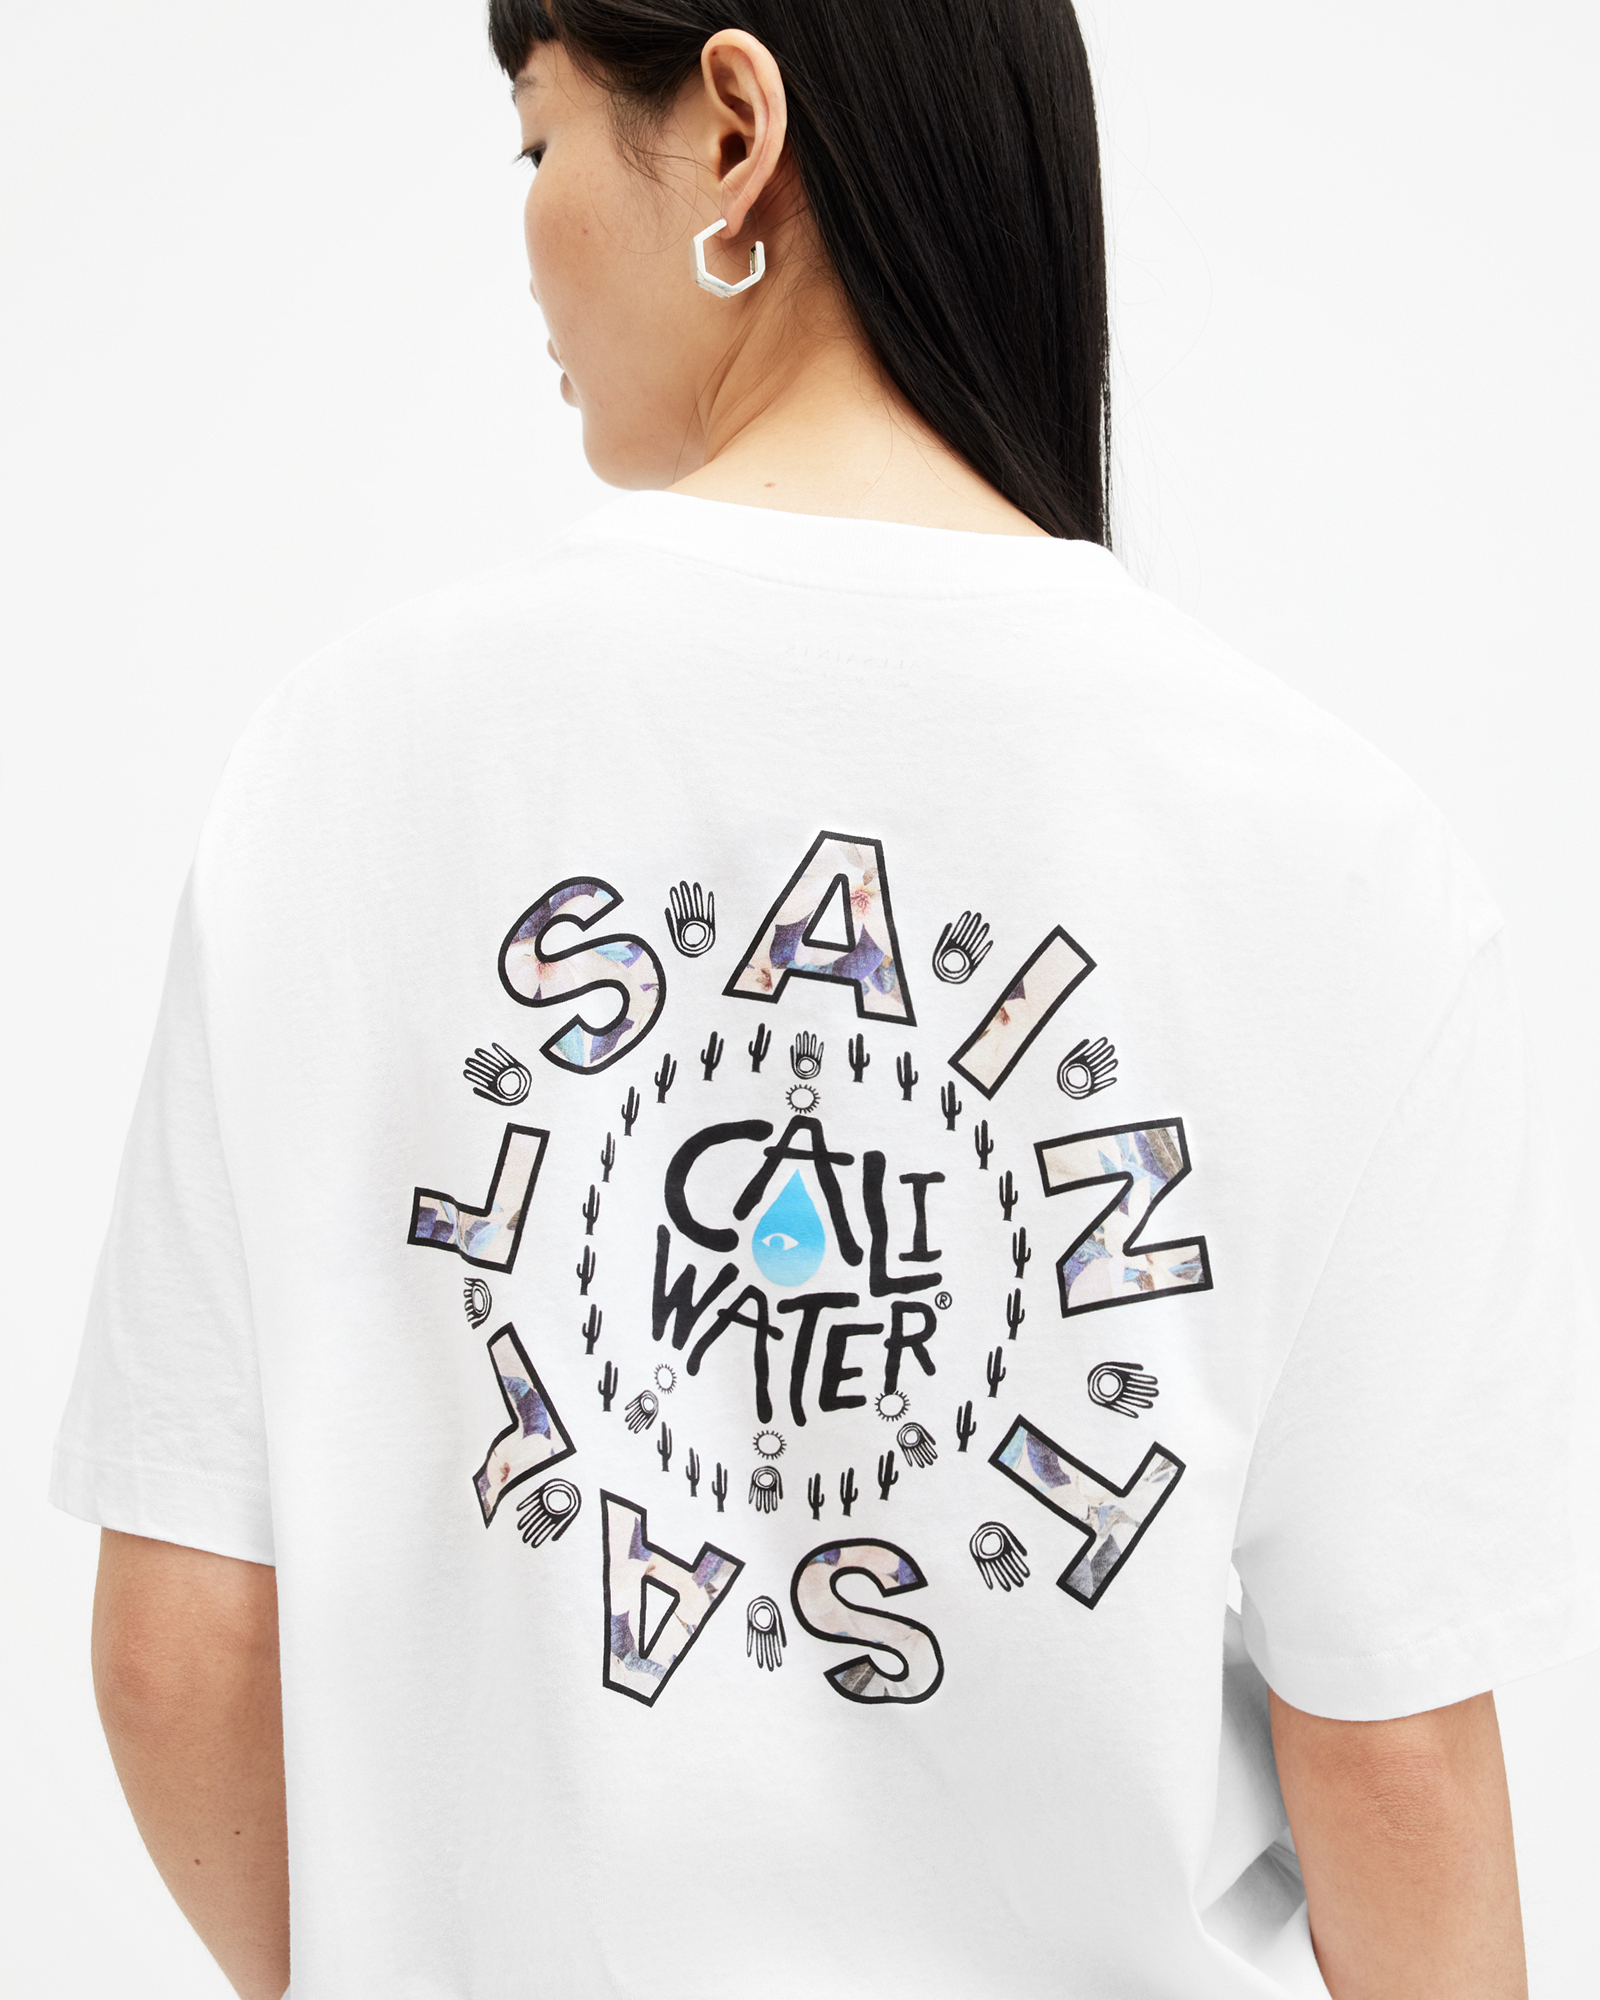 AllSaints Caliwater Relaxed Fit T-Shirt